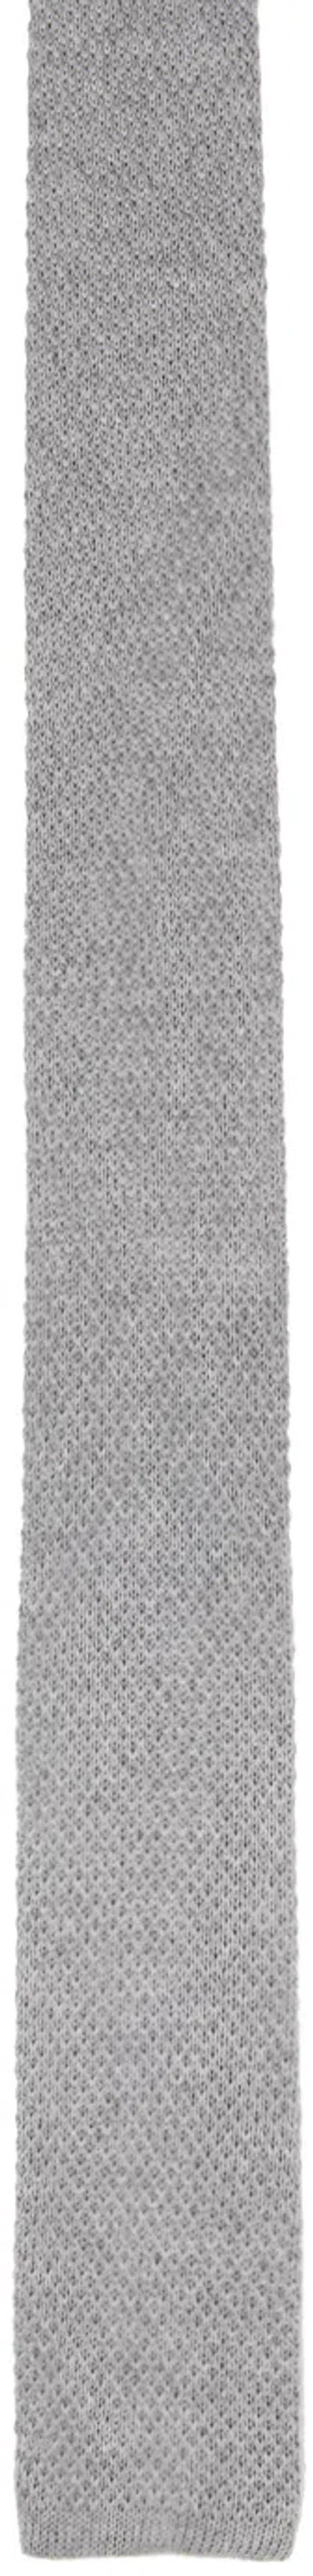 Solid Homme Gray Knit Tie In 942g Grey